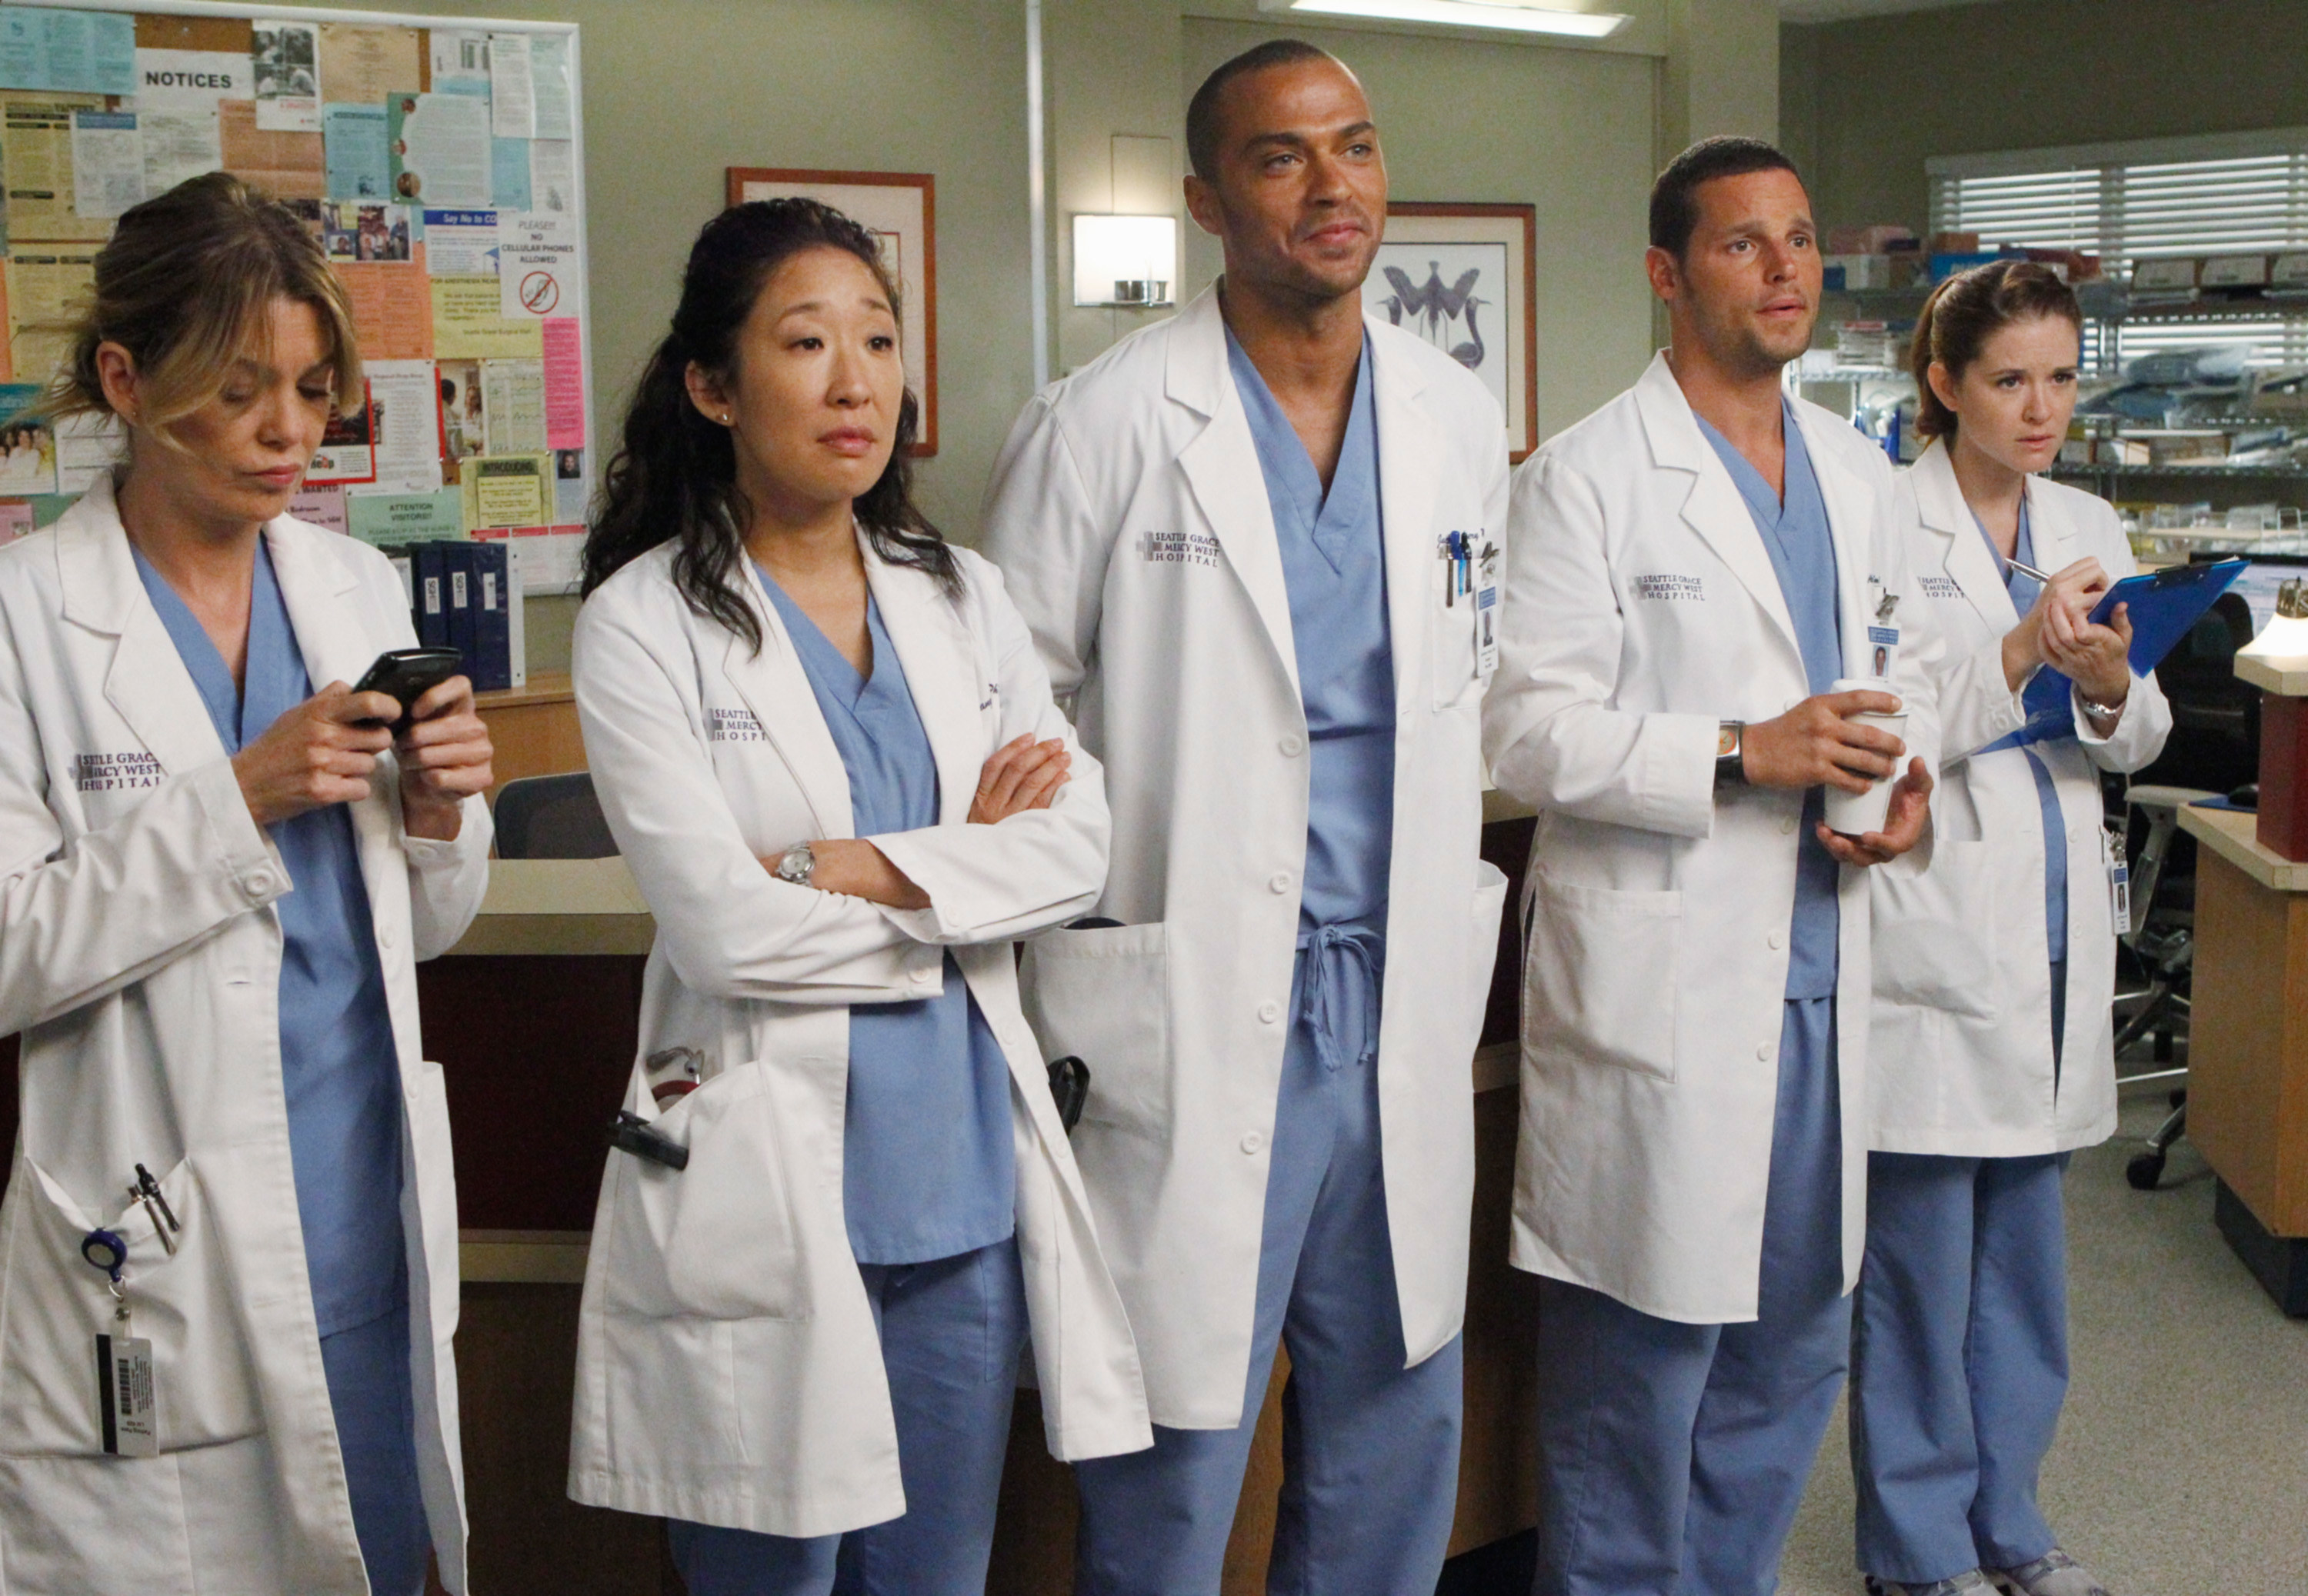 The interns of Seattle Grace hospital in the clinic